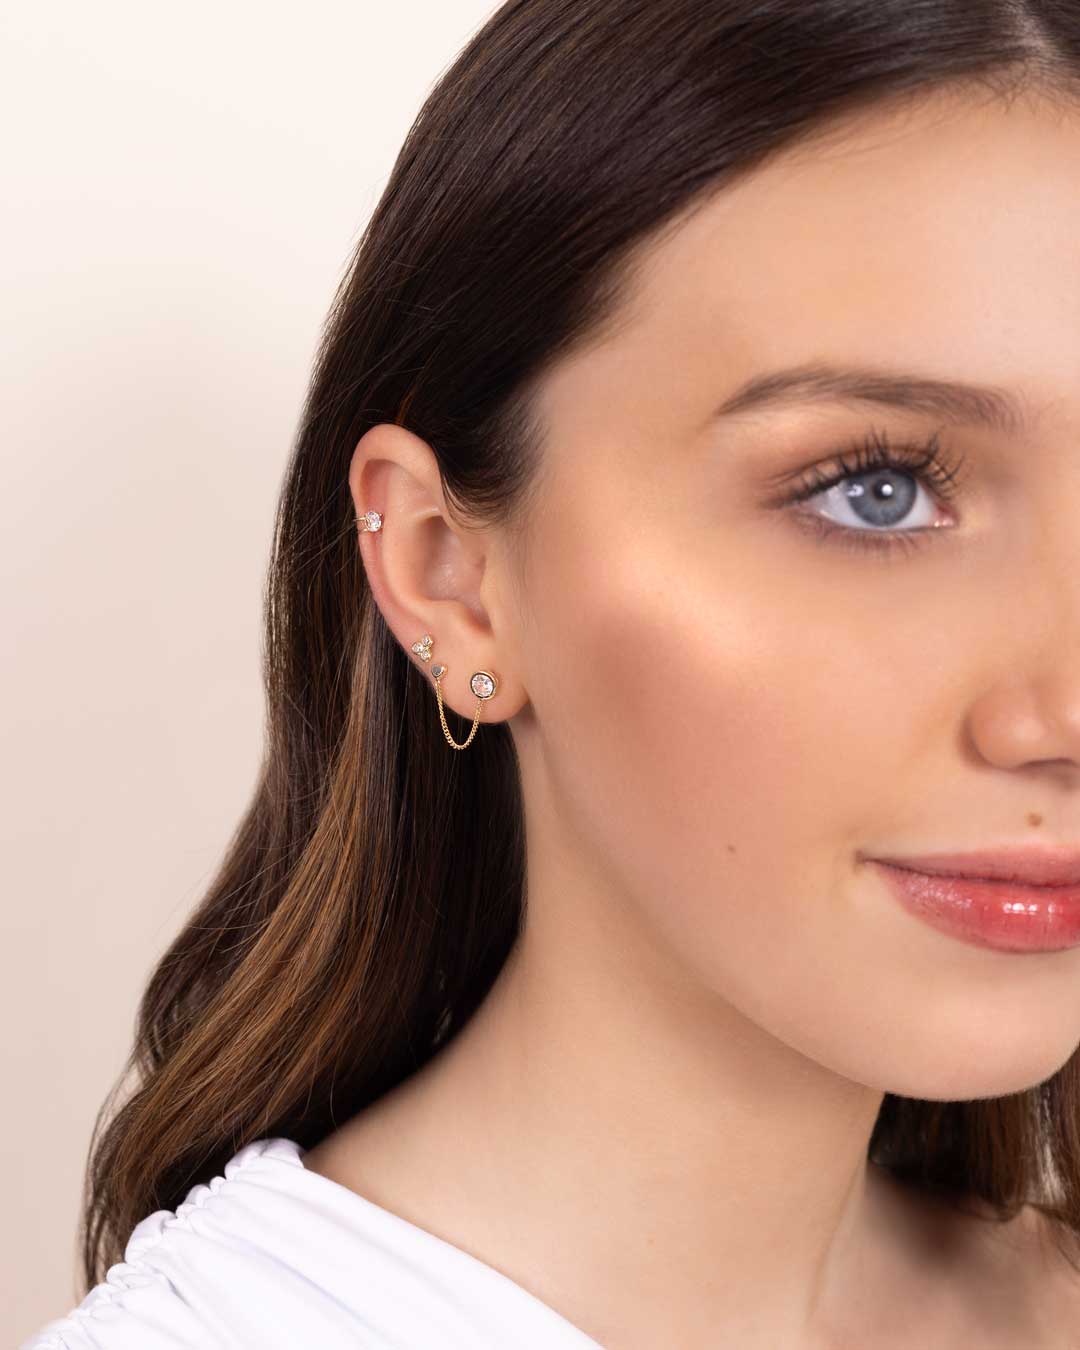 14K GOLD EARCUFF WITH CRYSTALS